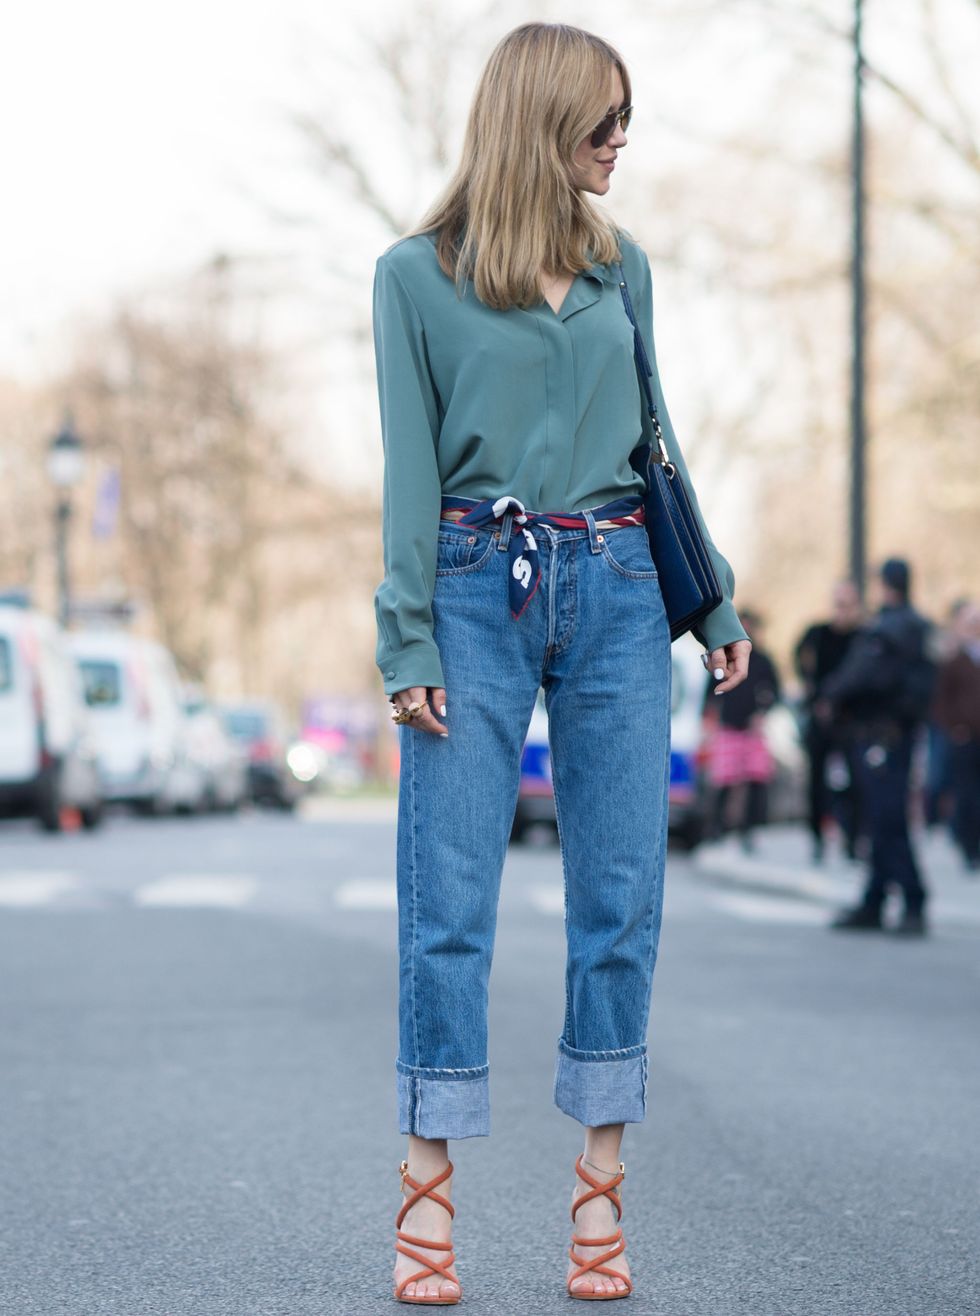 Styling Tricks to Know by Age 30 - Styling Tips for Better Outfits